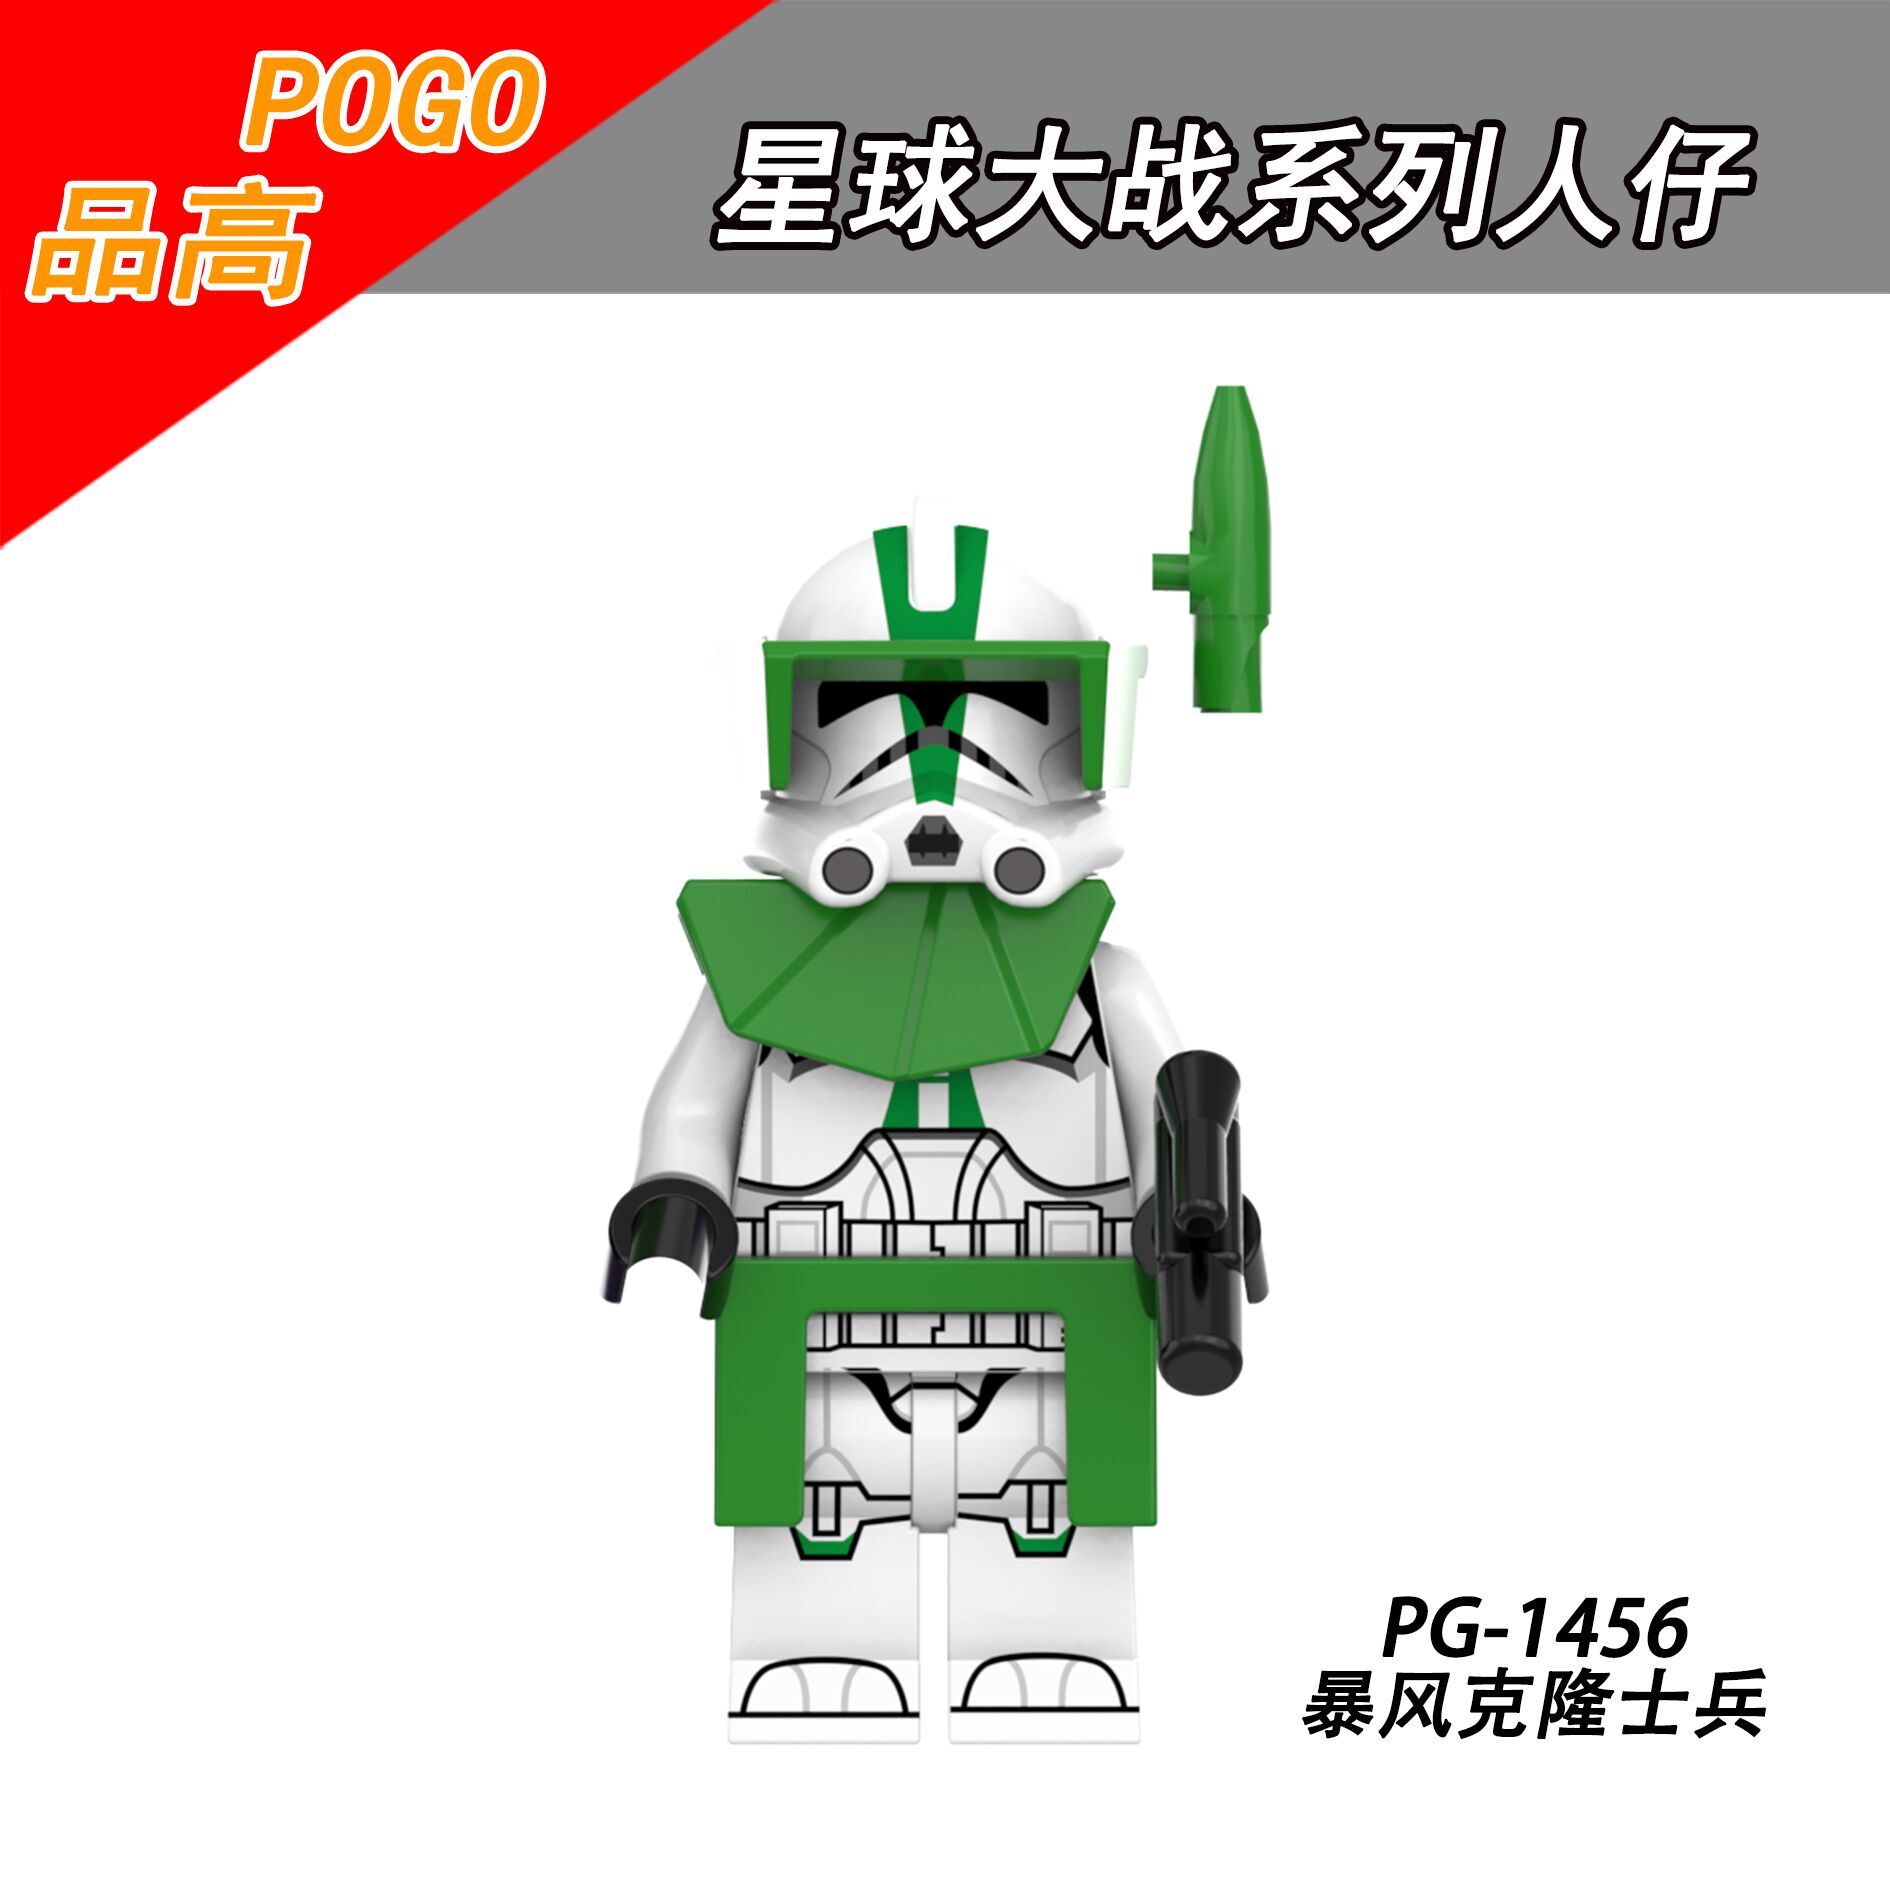 PG1449 PG1450 PG1451 PG1452 PG1453 PG1454 PG1455 PG1456 PG8293 Star Wars Clone Strooper Building Blocks Bricks Movie Series Action Educational Toys for Kids Gifts 